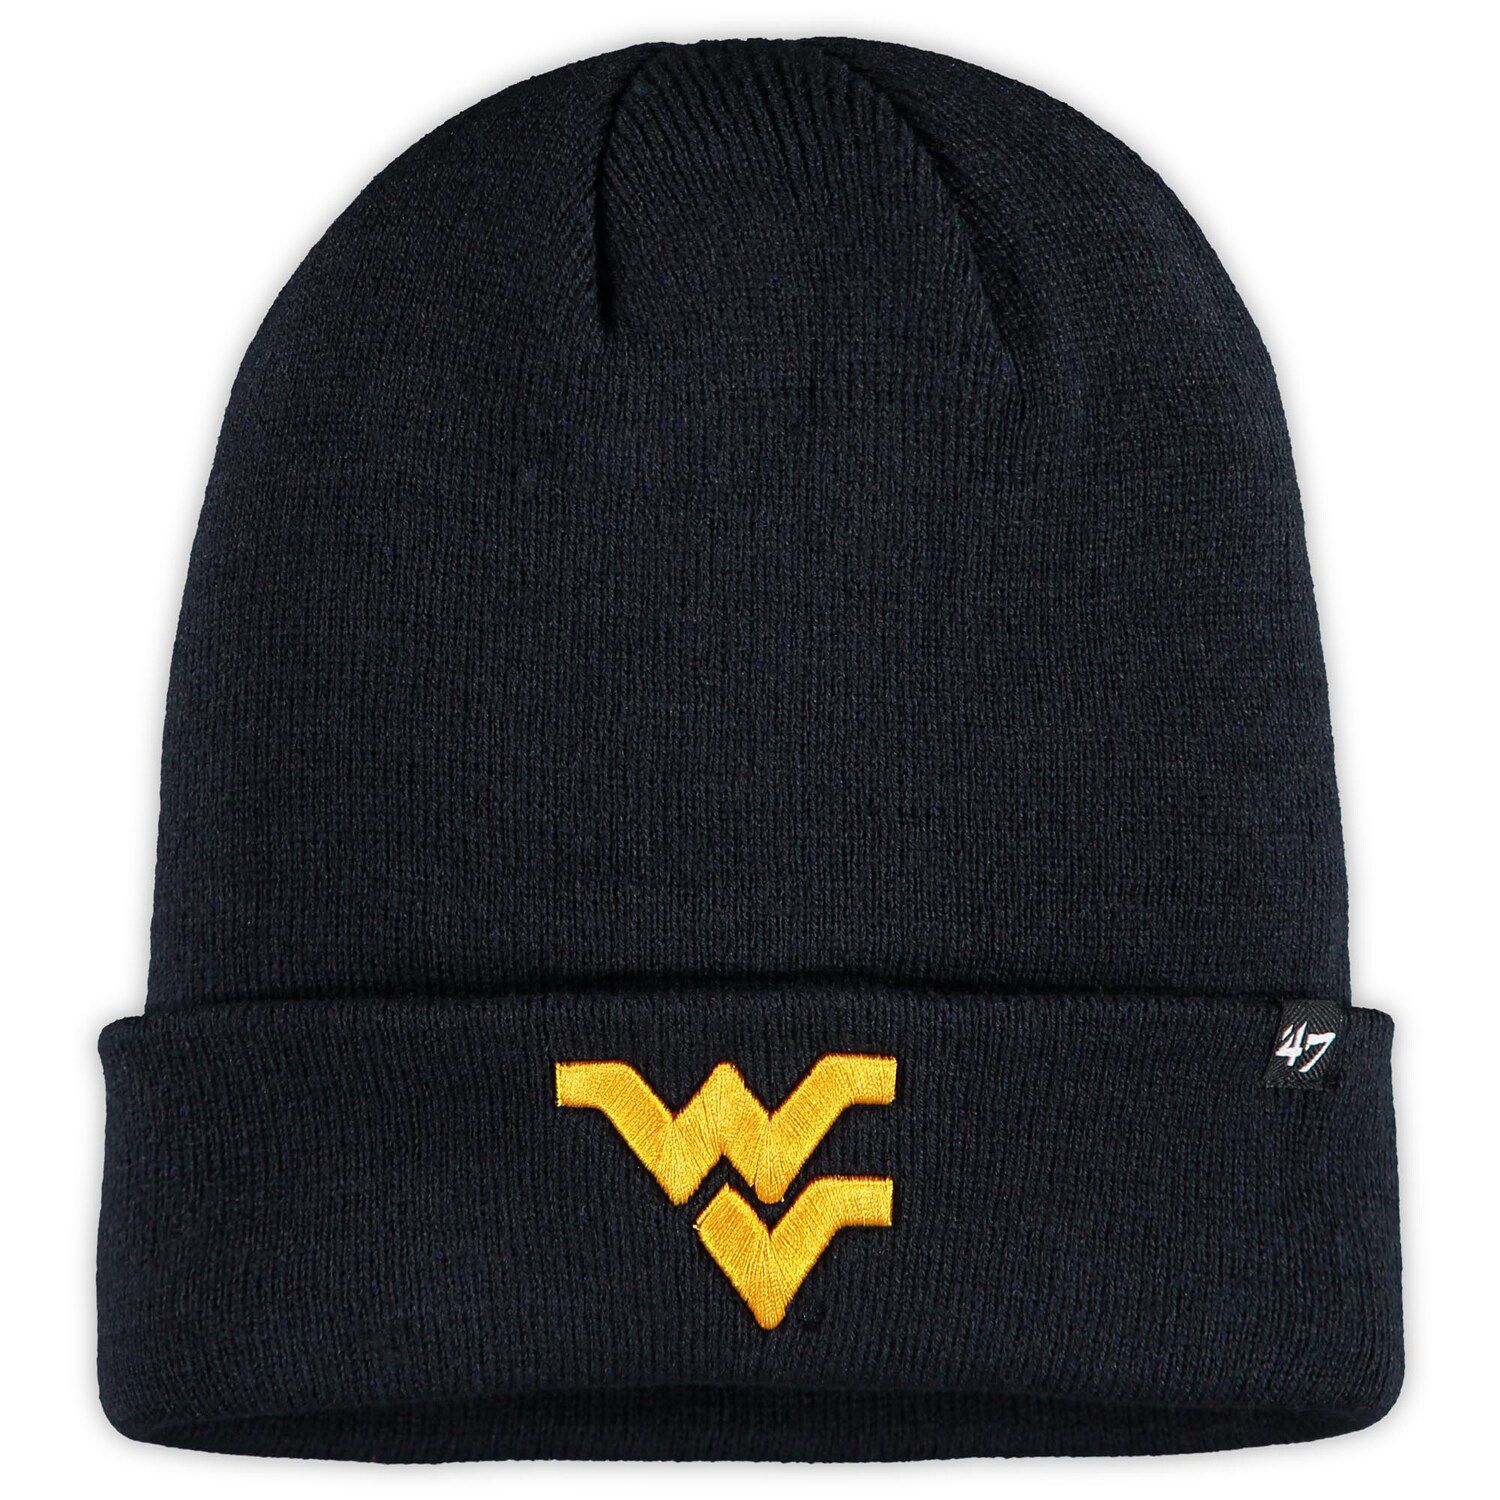 Image for Unbranded Men's '47 Navy West Virginia Mountaineers Raised Cuffed Knit Hat at Kohl's.